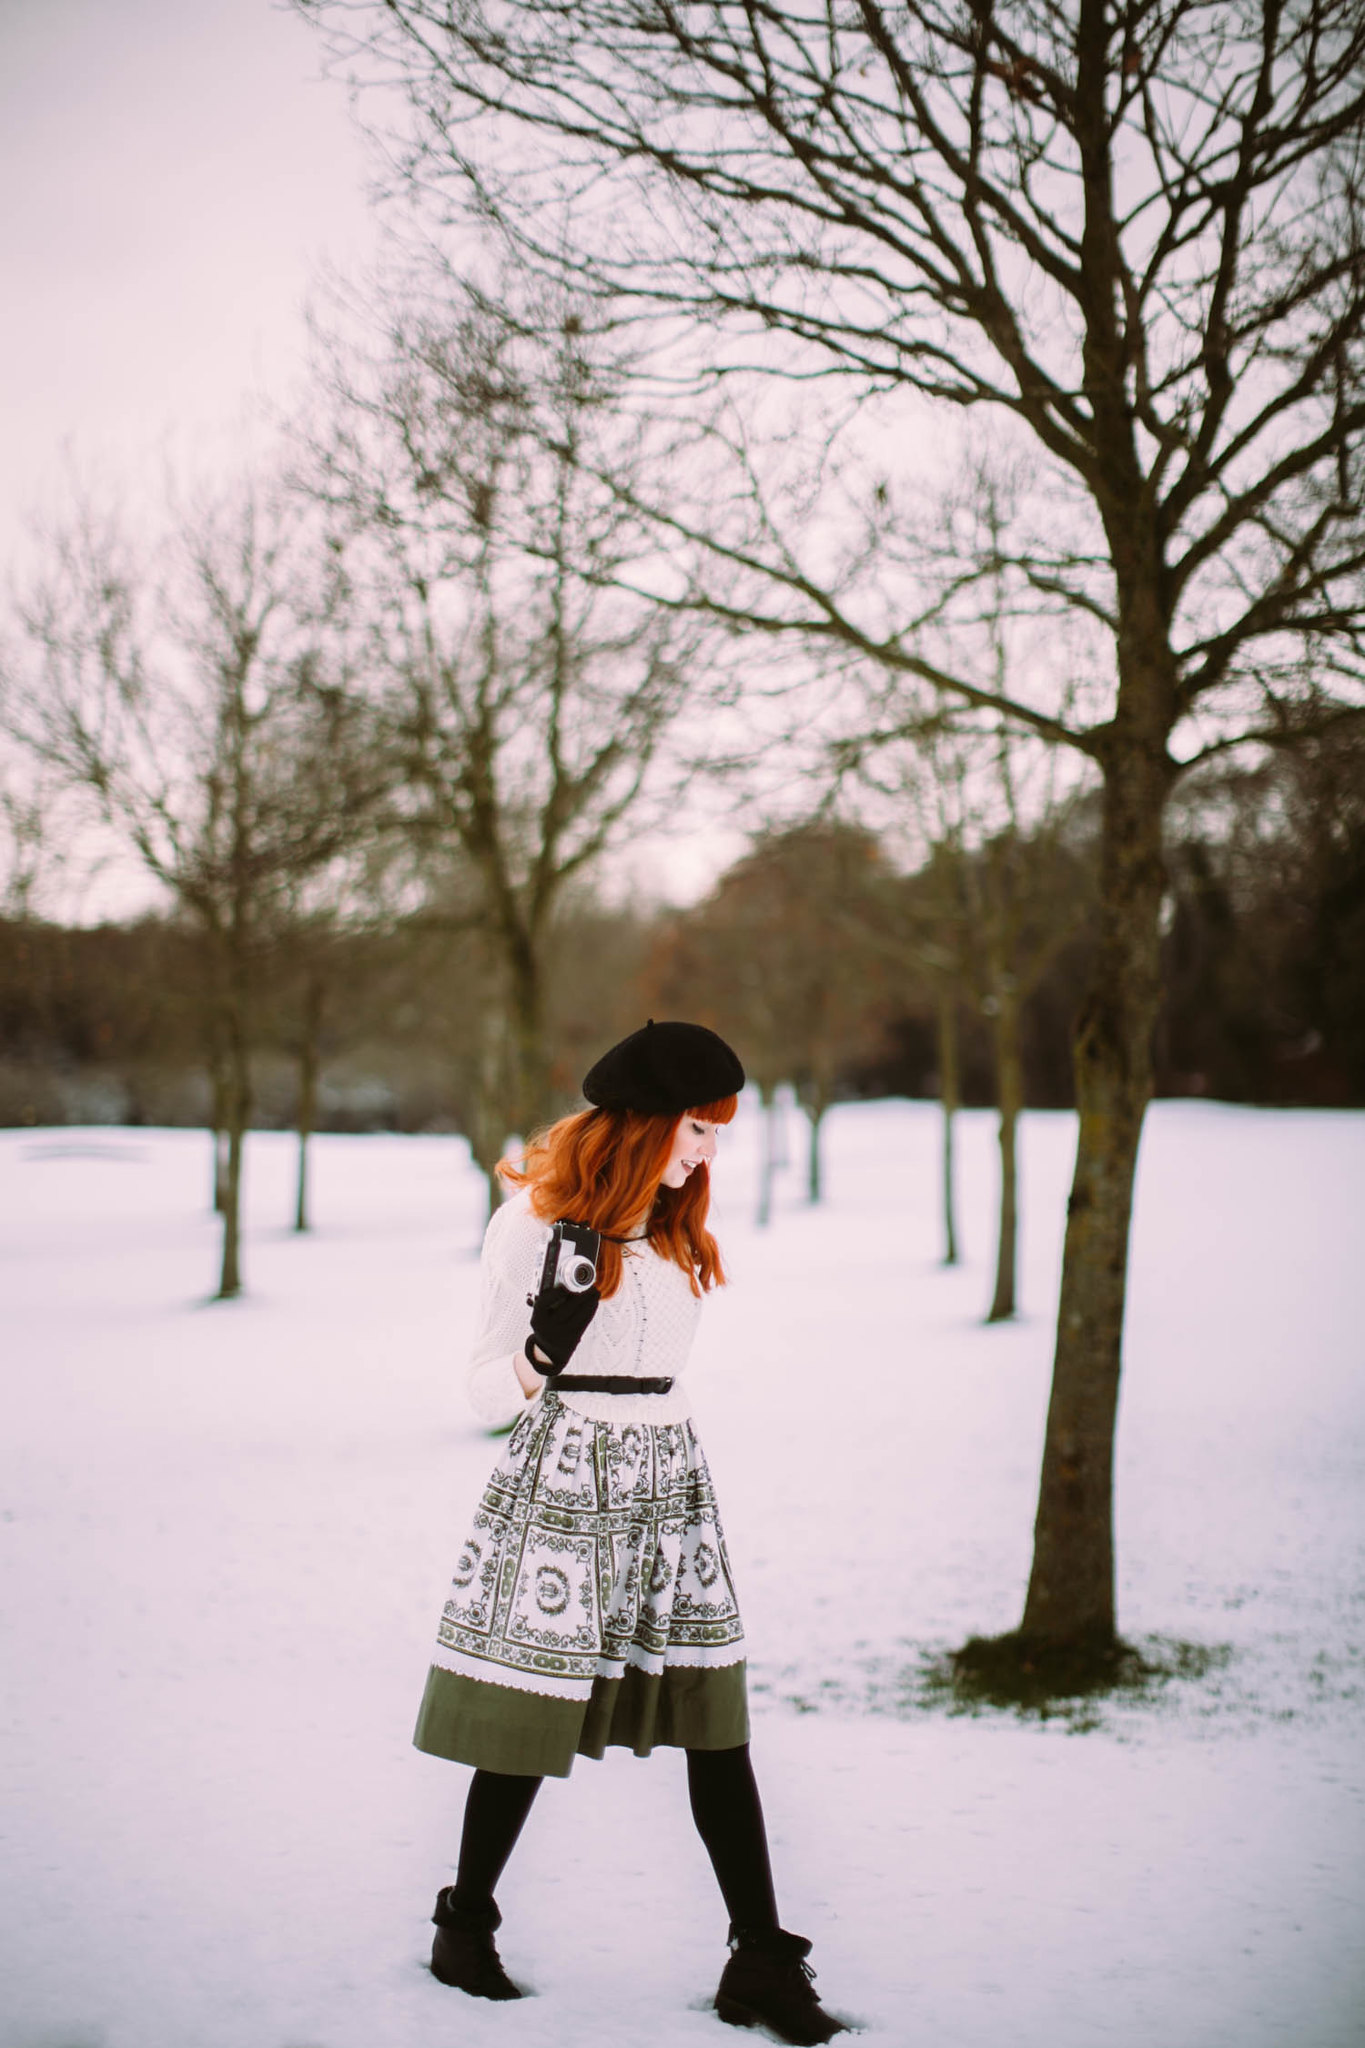 Walking In A Winter Wonderland In Vintage - A Clothes Horse